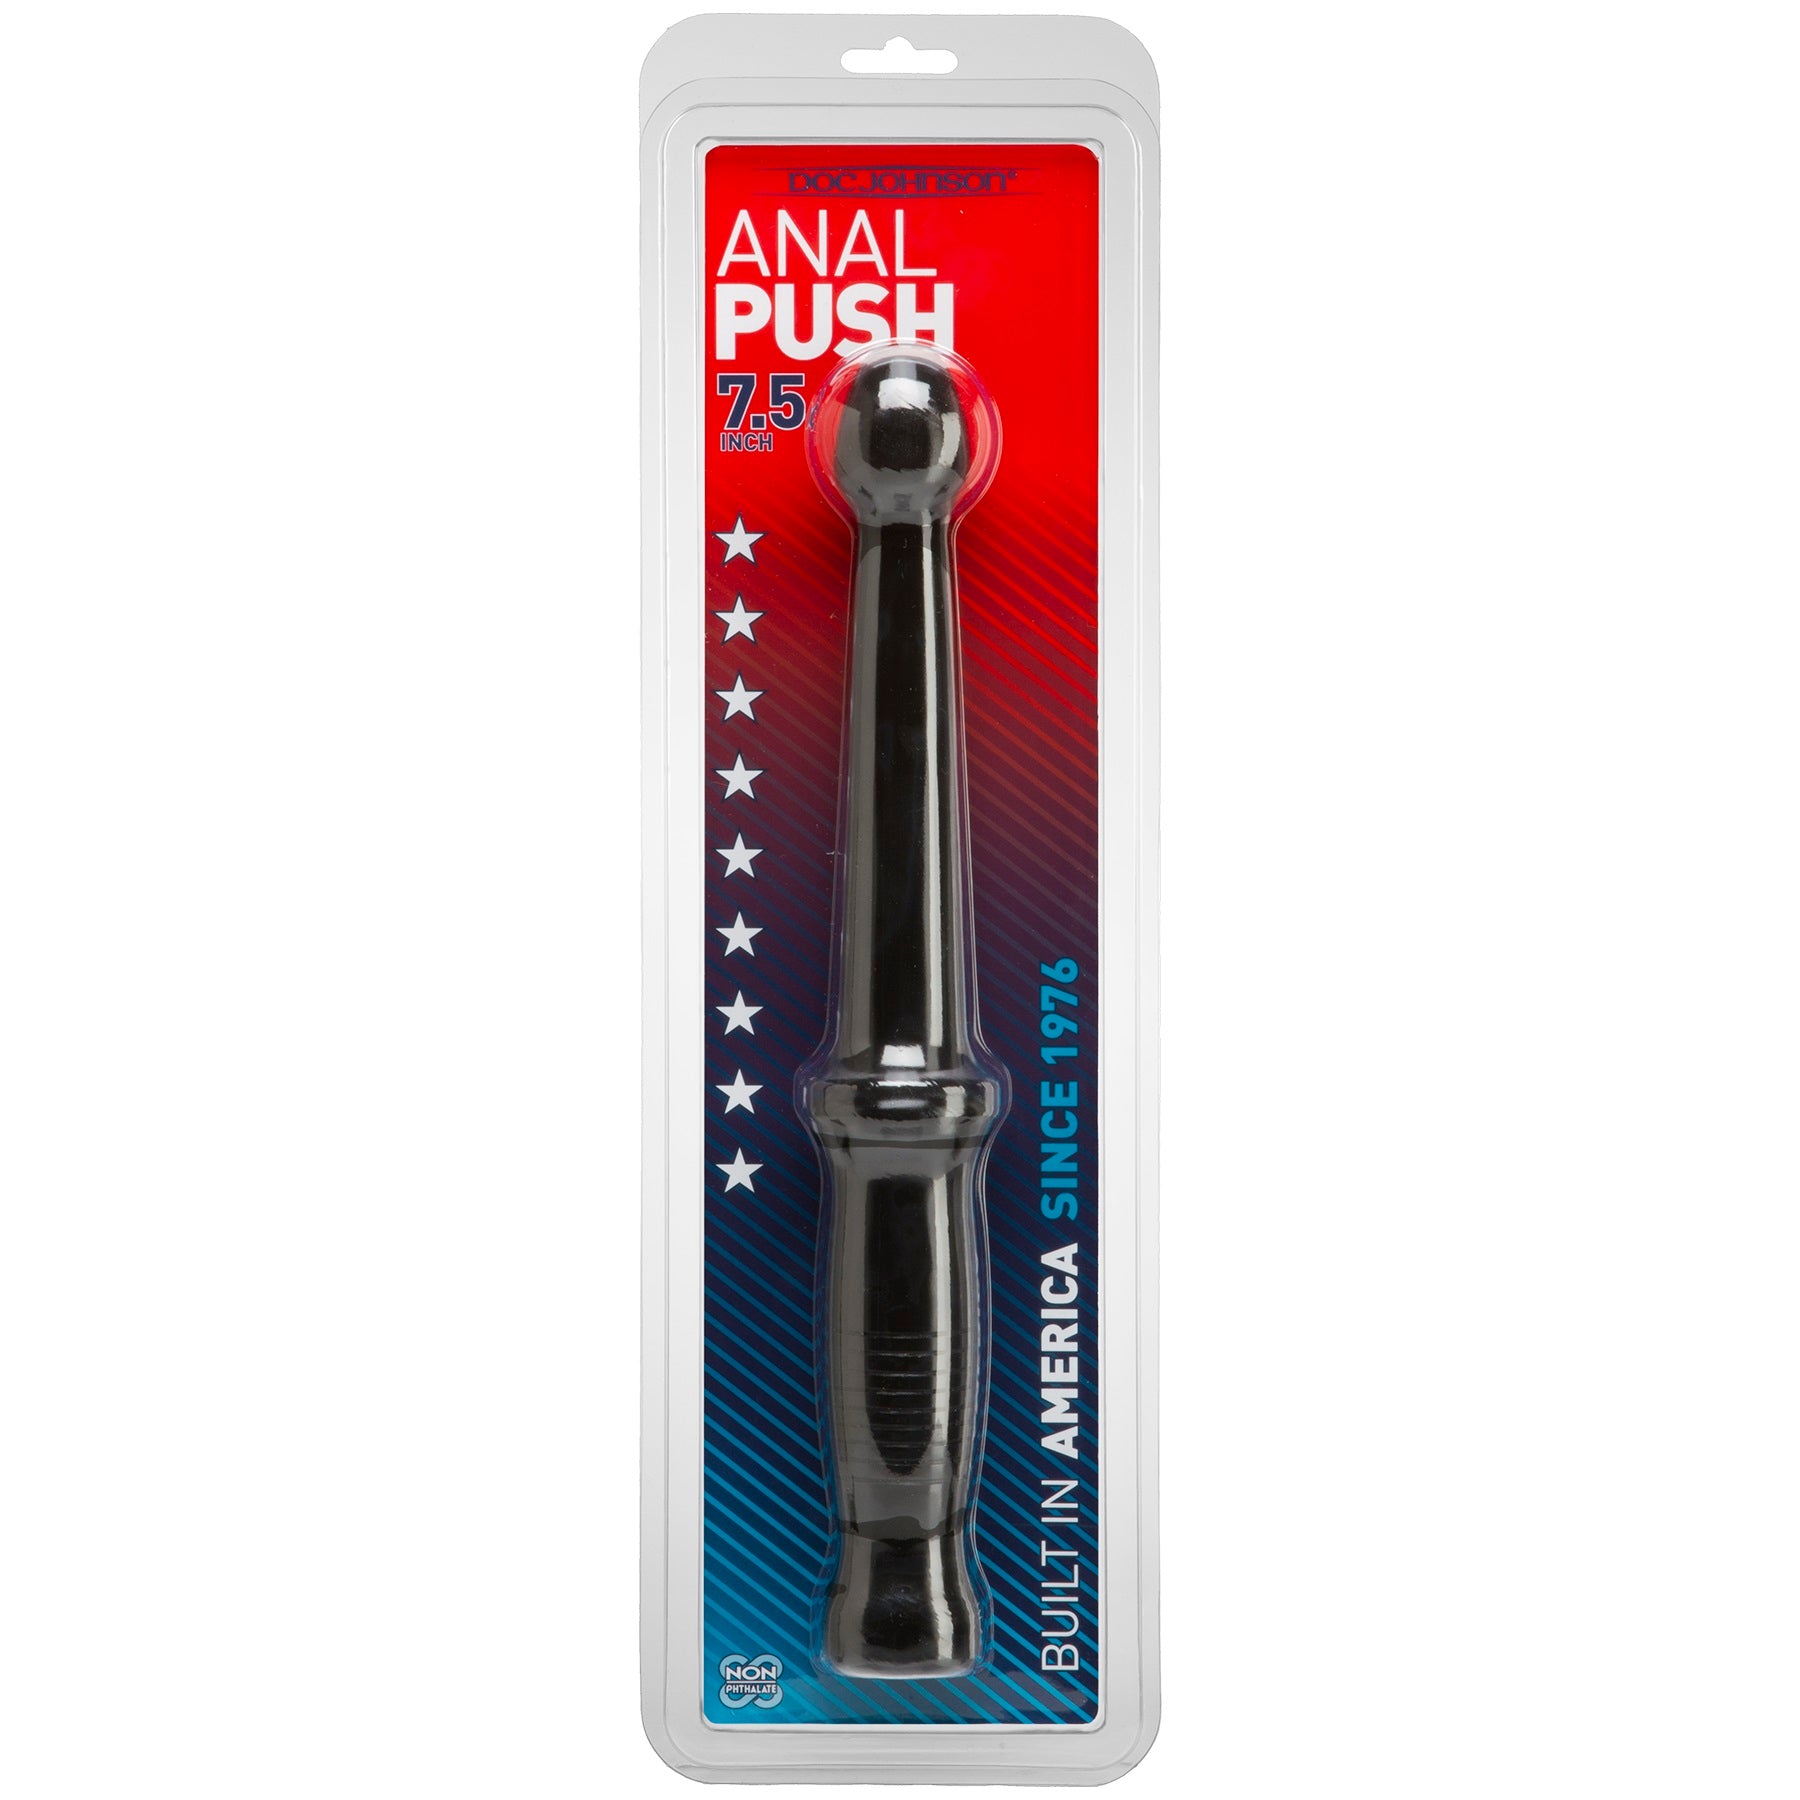 Anal probe for anal play sex toy